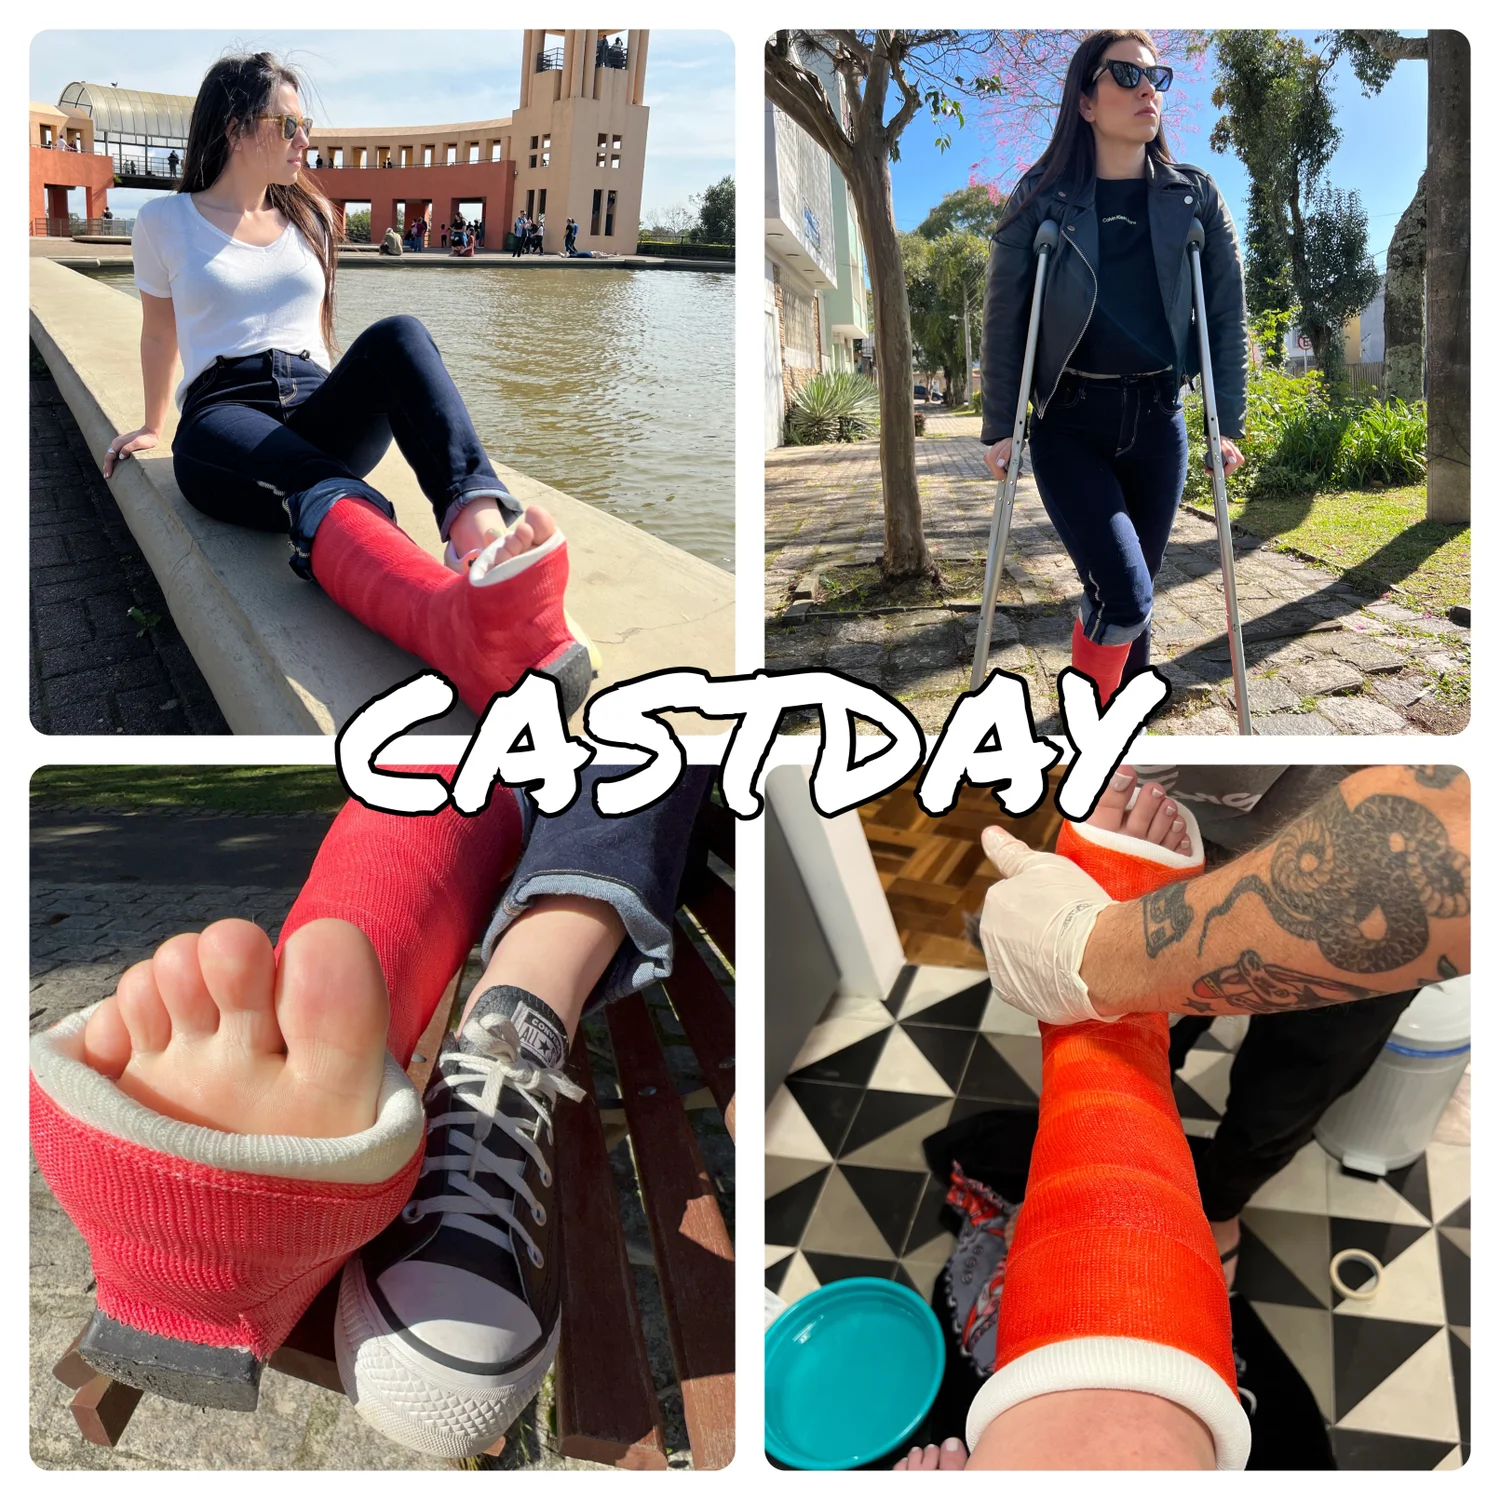 Kitty outdid herself once again and wore the most beautiful SLWC that Castday has ever produced. It was an intense and enjoyable 5 days. This was the longest time Kitty has ever worn a cast. Many close ups and photos and videos of her perfect feet.